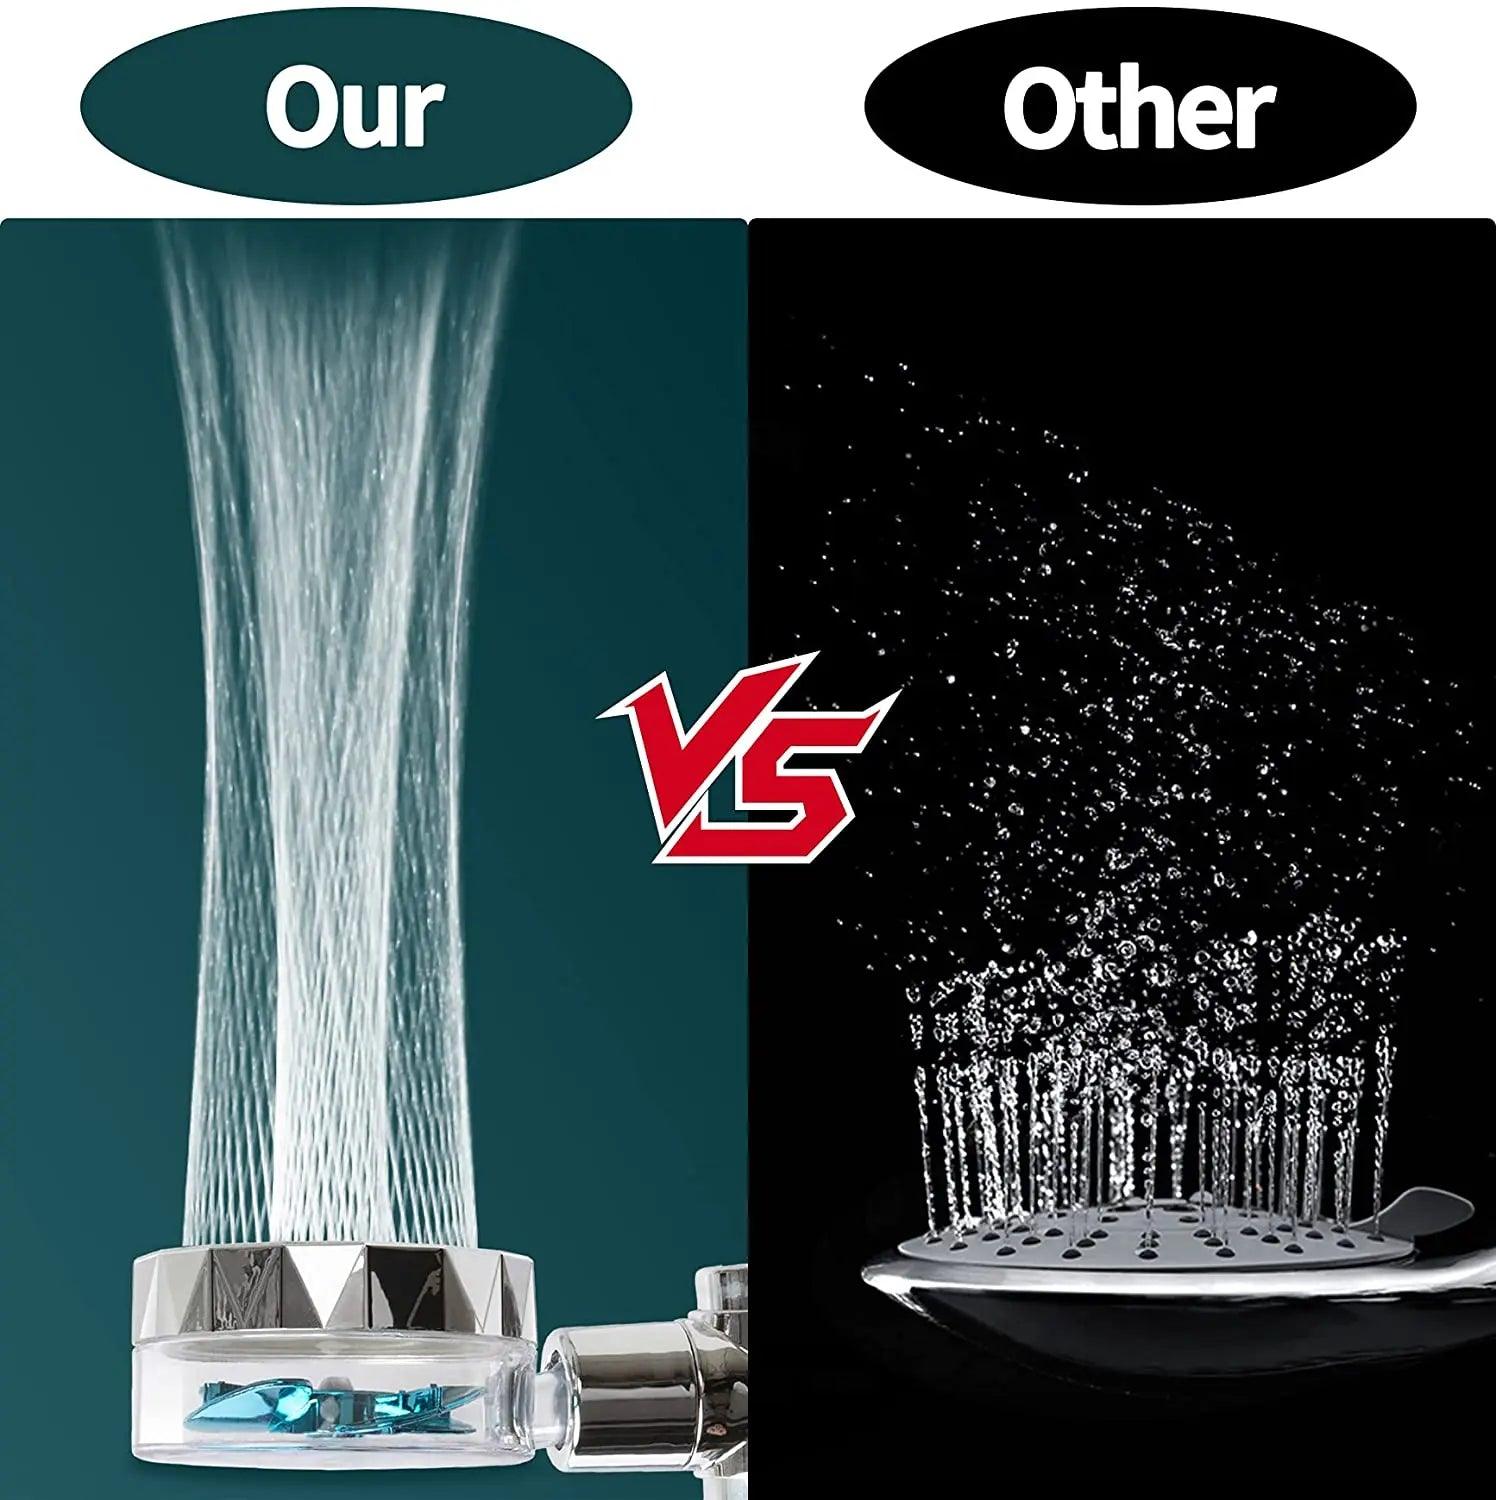 Ultimate High-Pressure Handheld Turbo Fan Showerhead with Water Saving Filters and Rainfall Spray  ourlum.com   